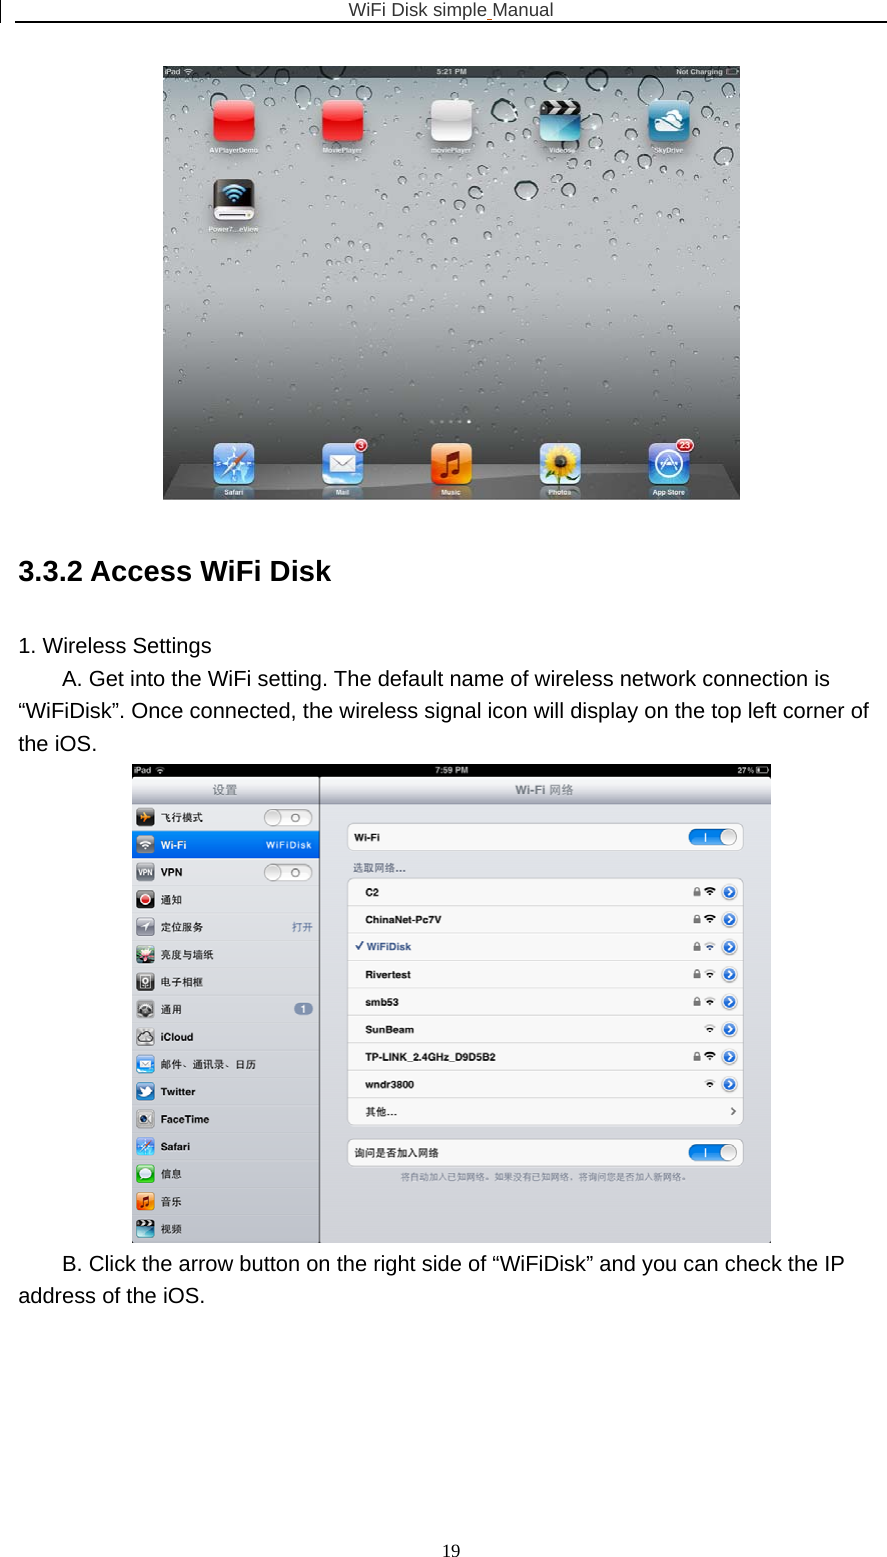 WiFi Disk simple Manual  19 3.3.2 Access WiFi Disk 1. Wireless Settings A. Get into the WiFi setting. The default name of wireless network connection is “WiFiDisk”. Once connected, the wireless signal icon will display on the top left corner of the iOS.  B. Click the arrow button on the right side of “WiFiDisk” and you can check the IP address of the iOS. 